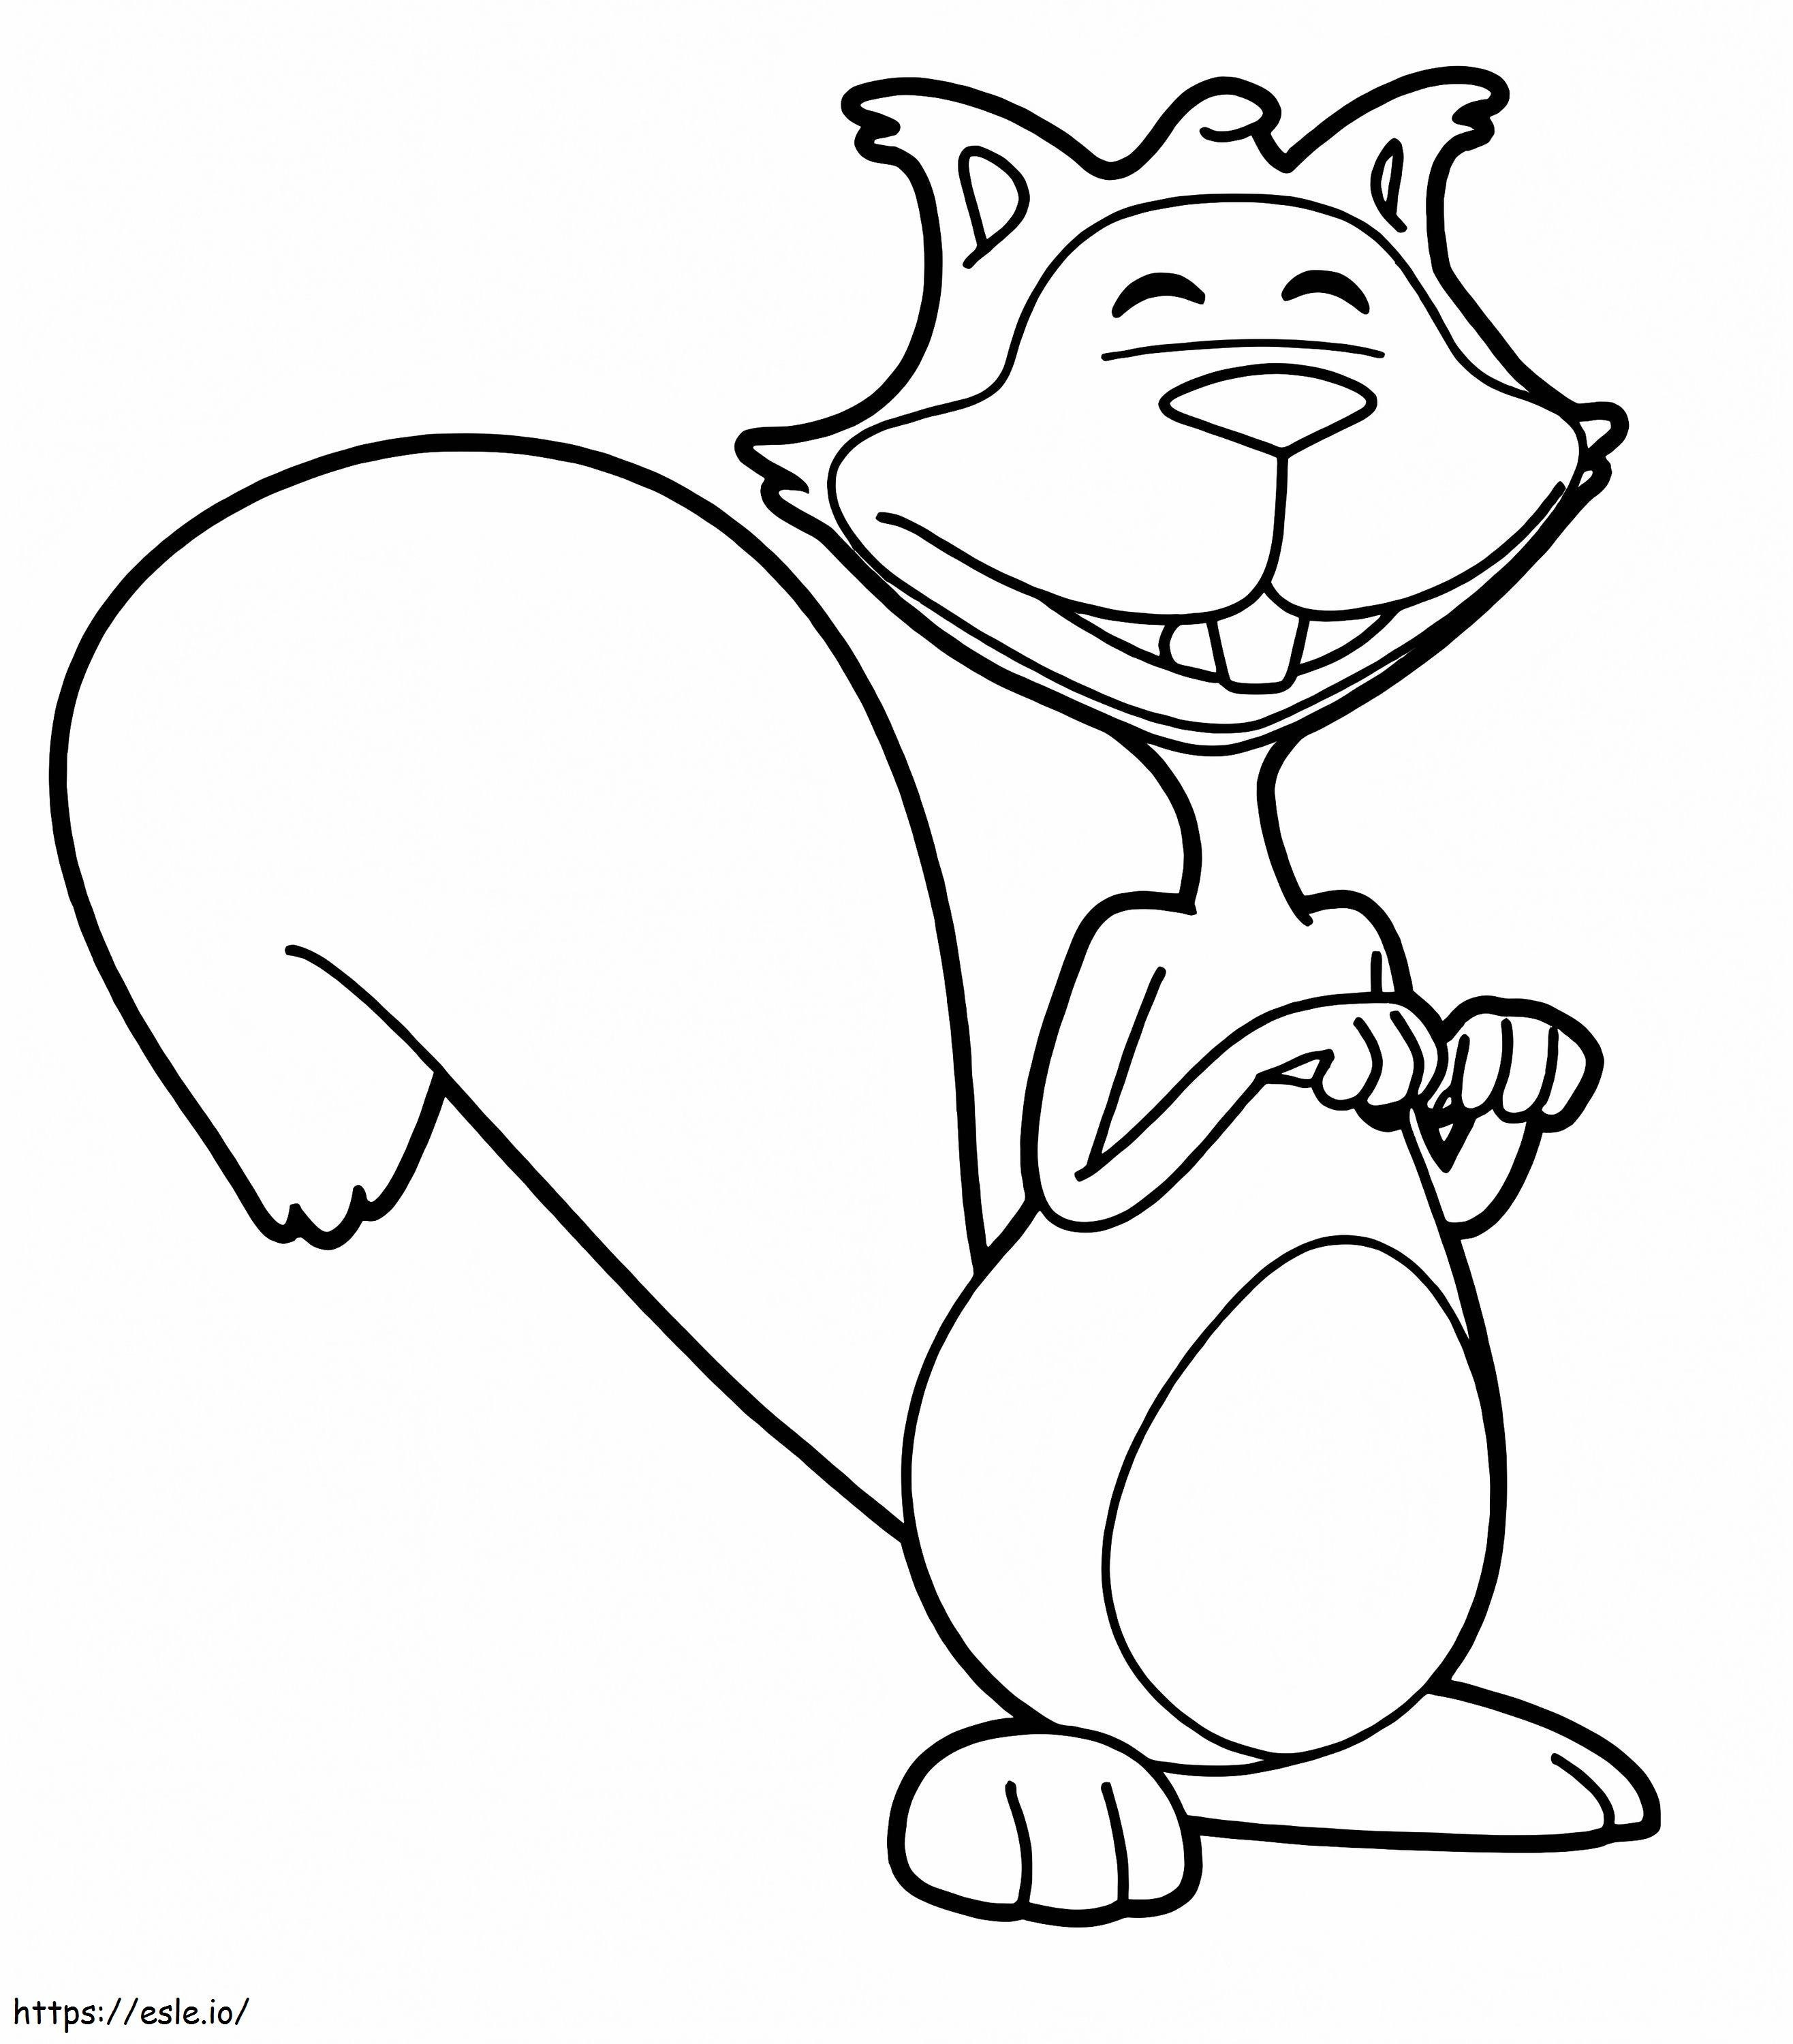 Cute Squirrel From Uki coloring page